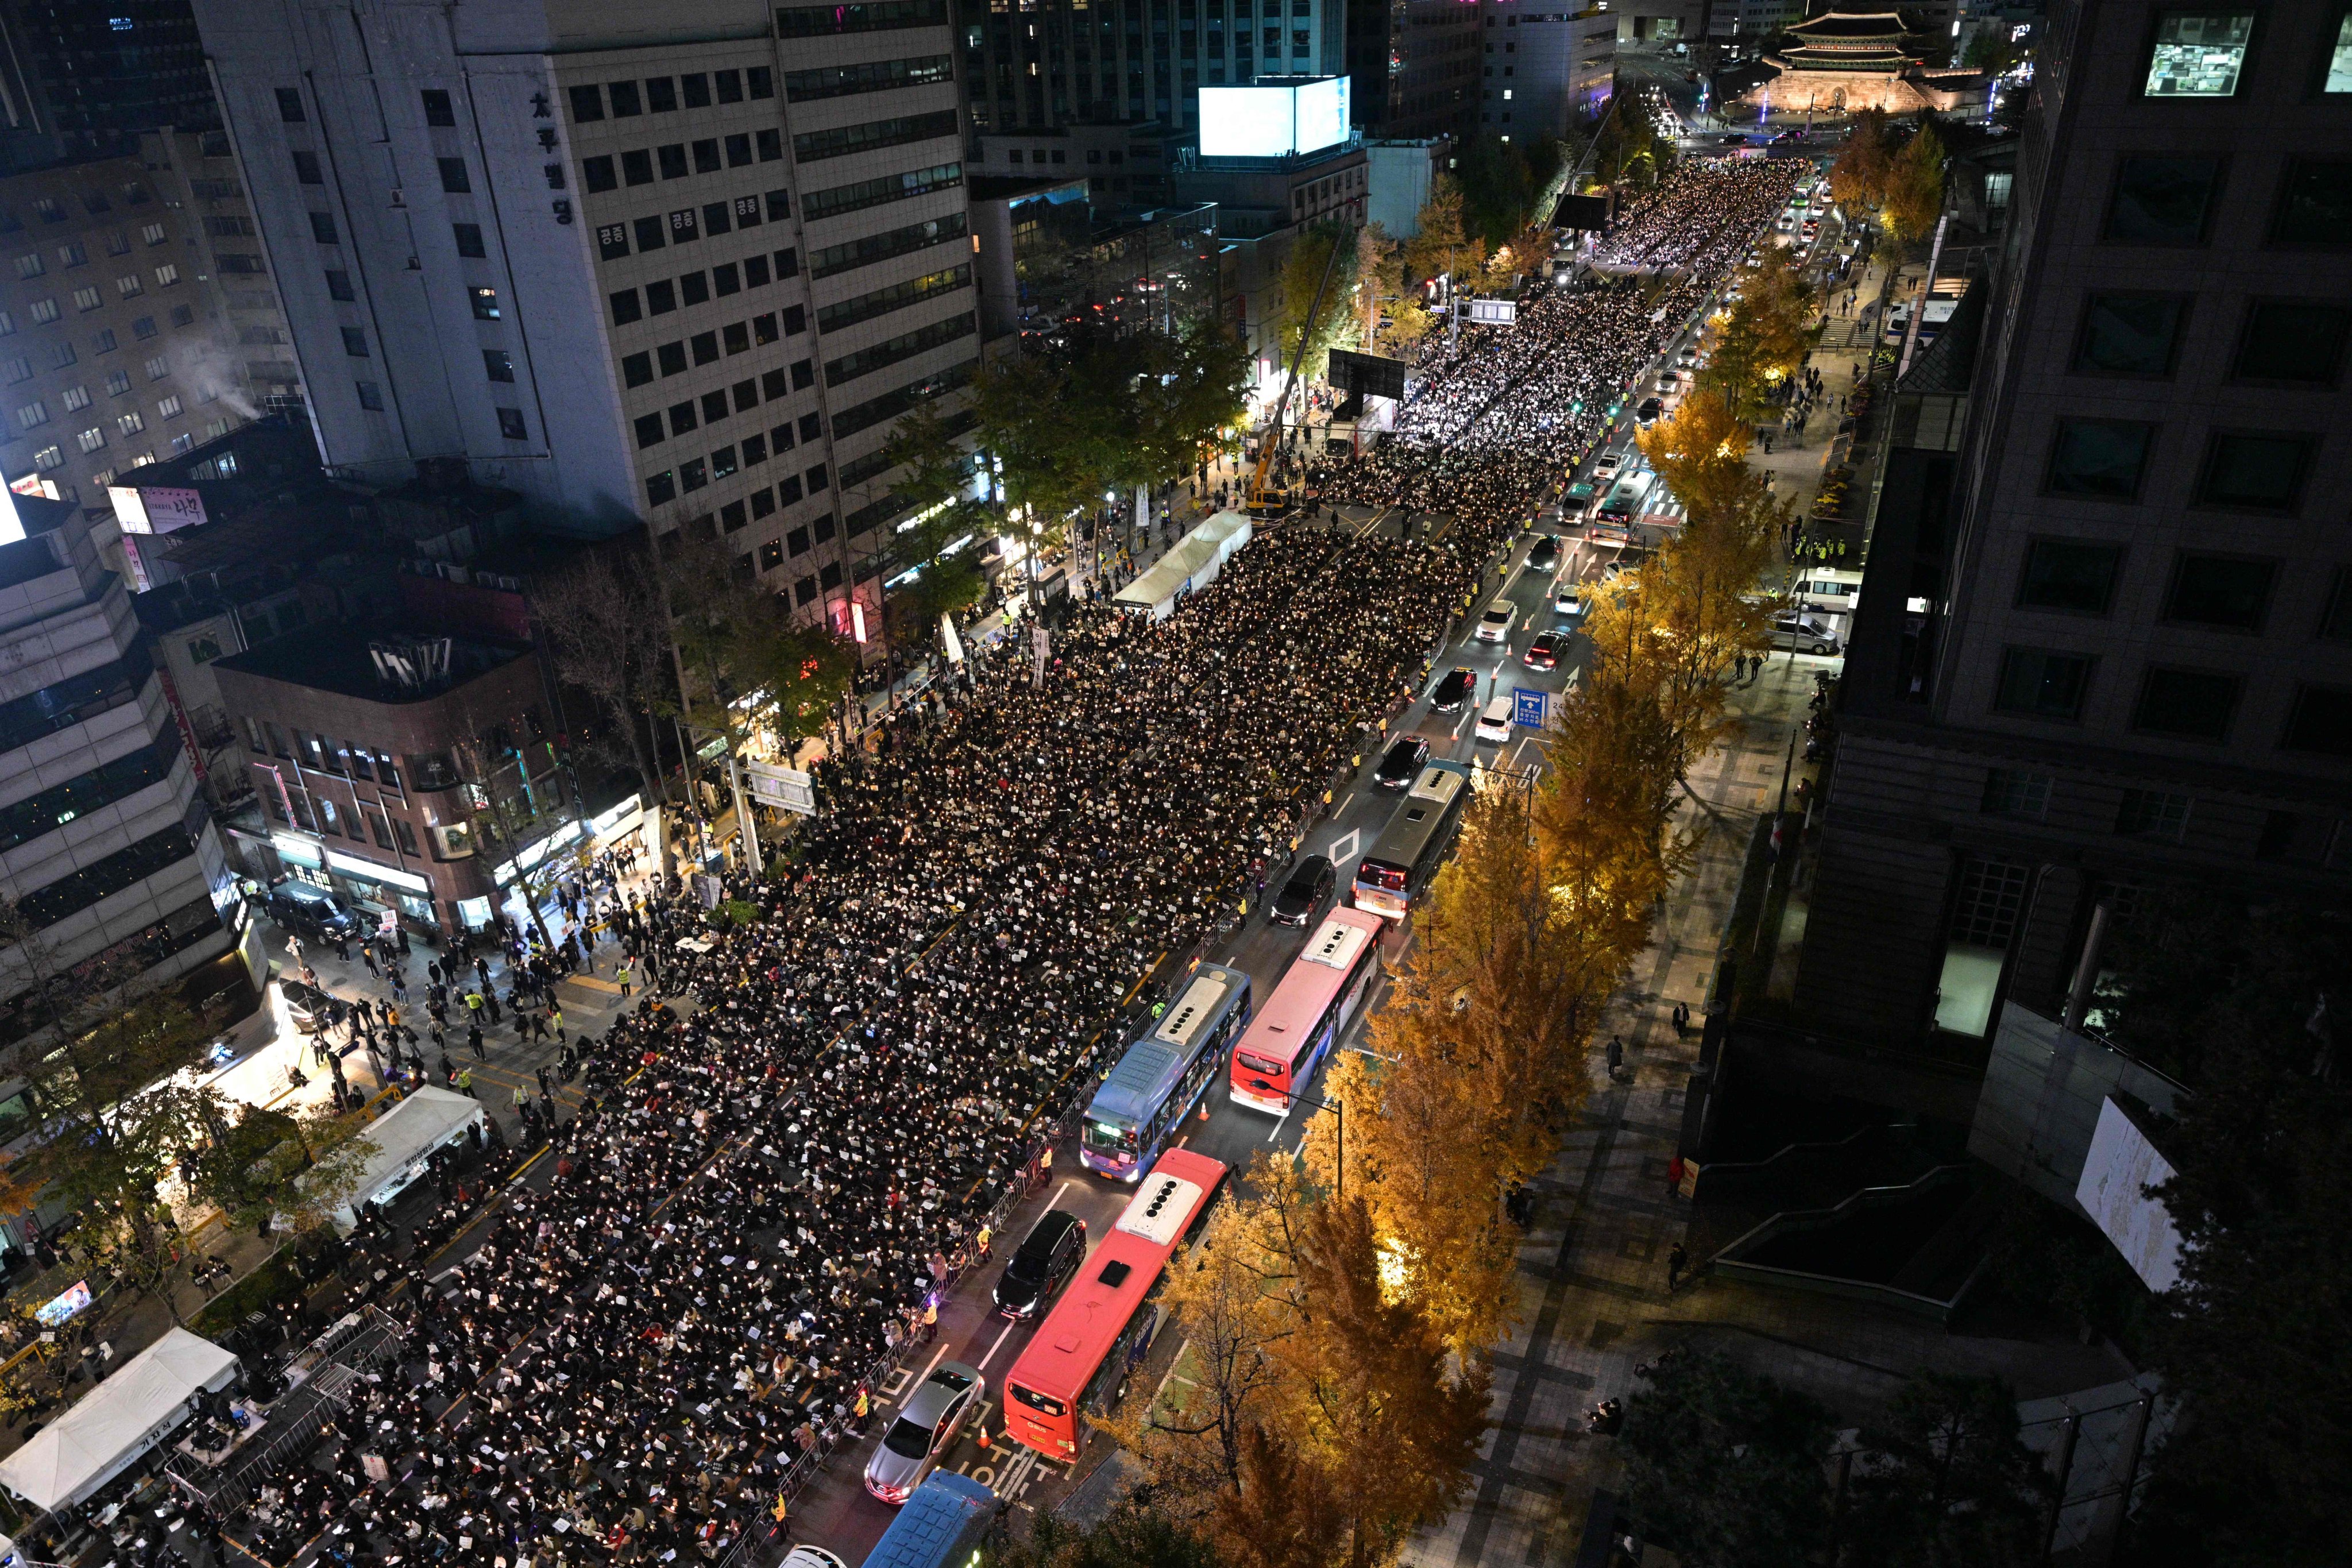 Mourners take part in a candlelight vigil in Seoul on Saturday to commemorate the 156 people killed in the October 29 Halloween crowd crush. Photo: AFP